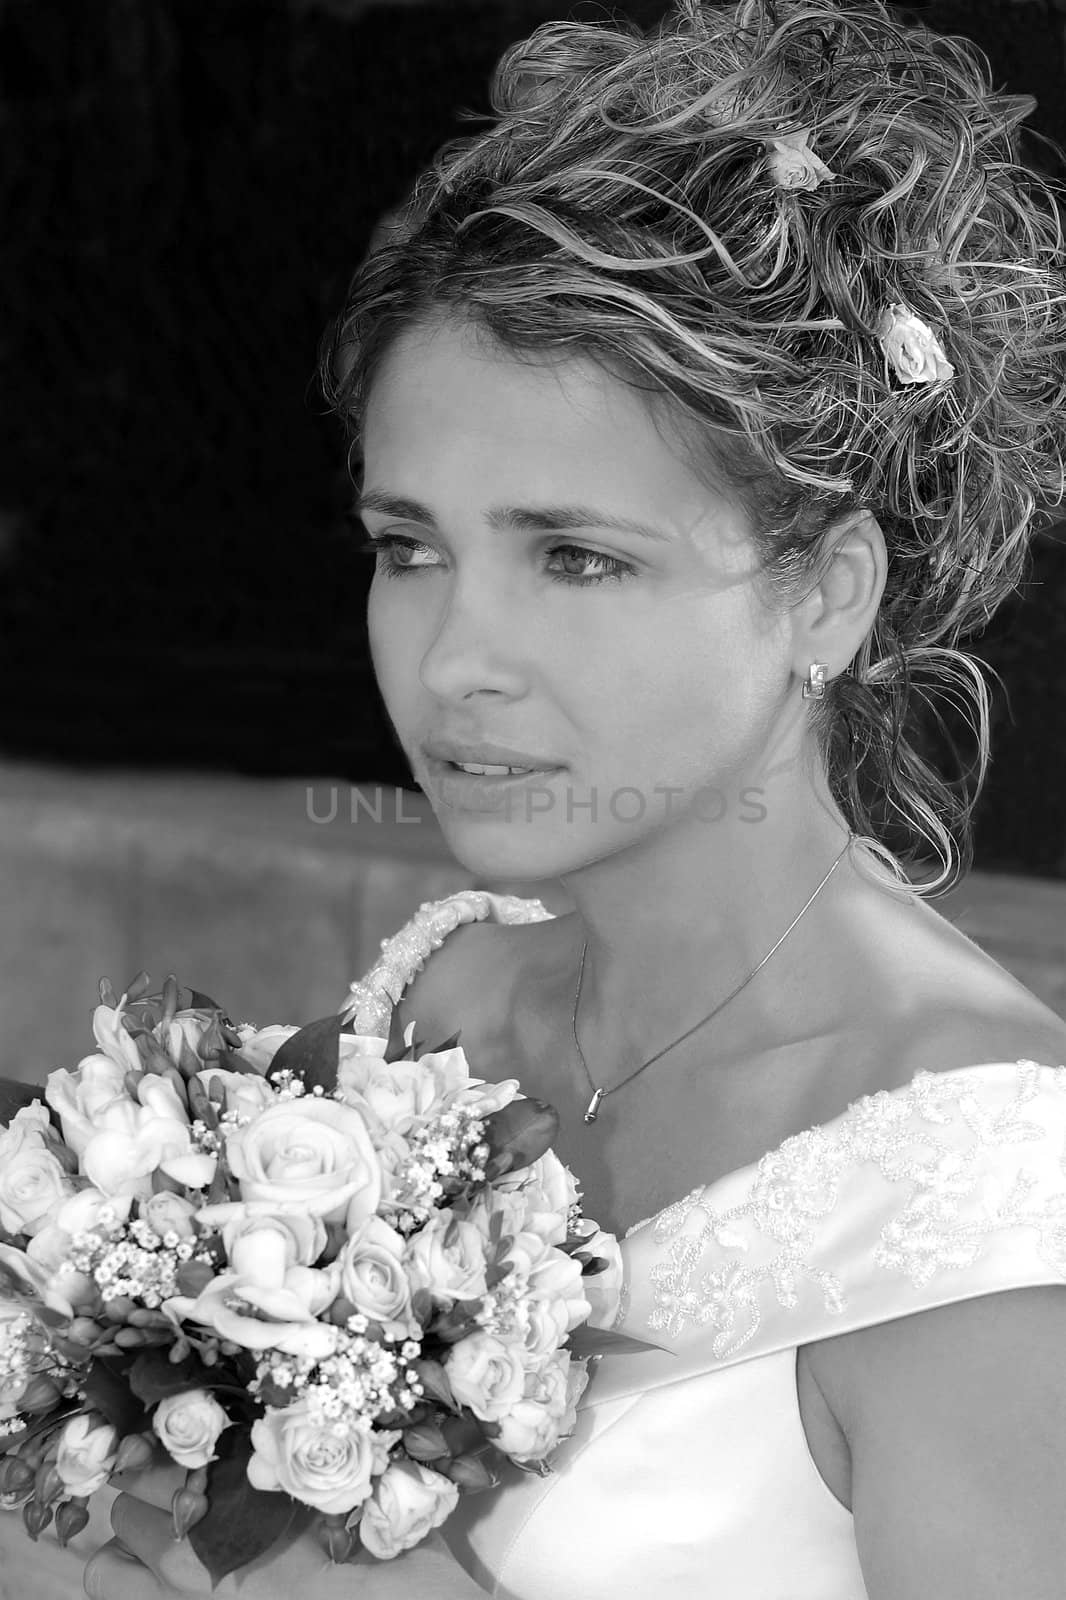 Black and white portrait of pretty young bride with bouquet of flowers.